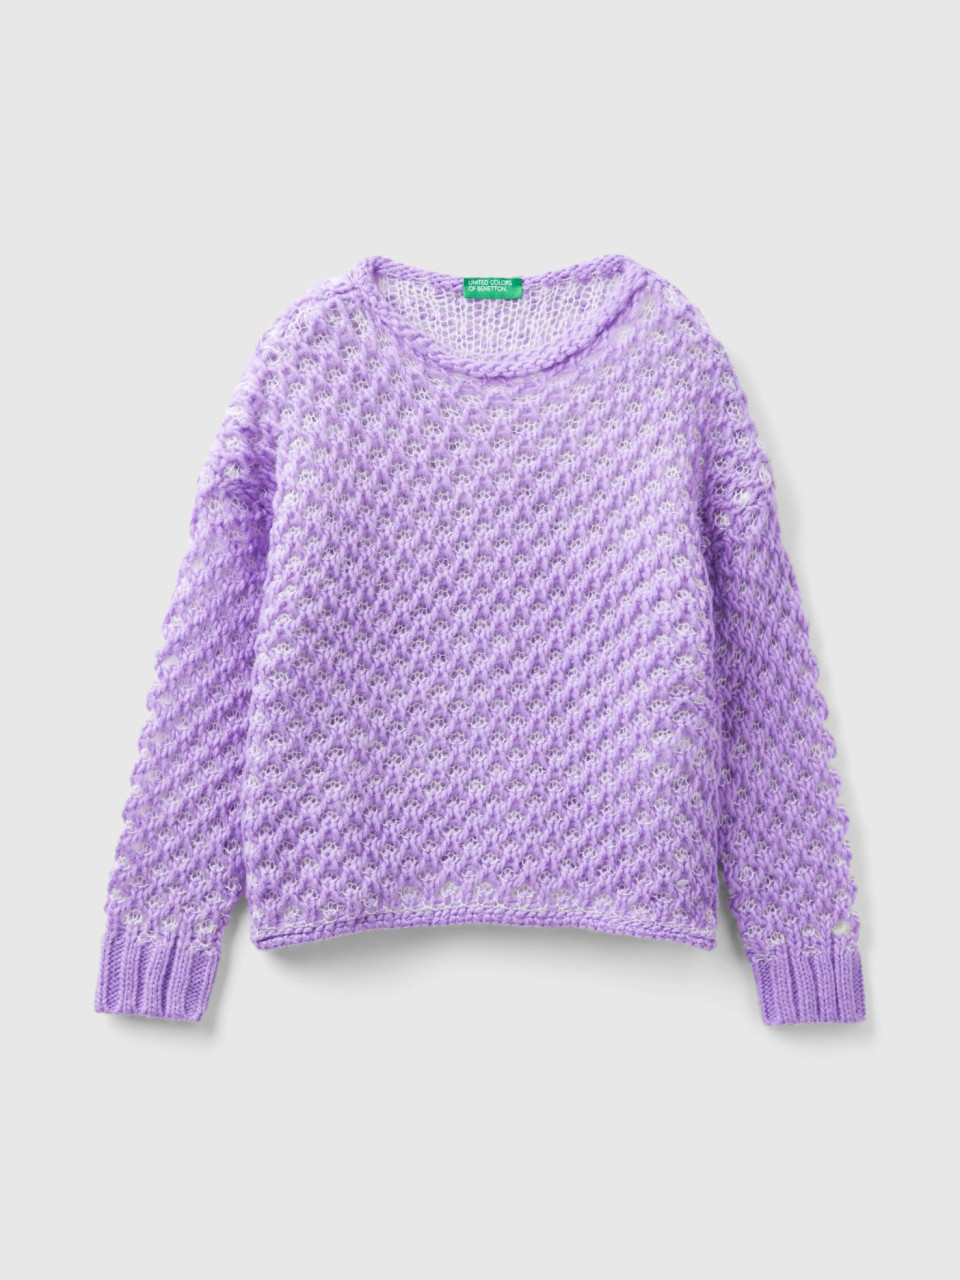 Benetton, Sweater With Jacquard Mesh, Lilac, Kids